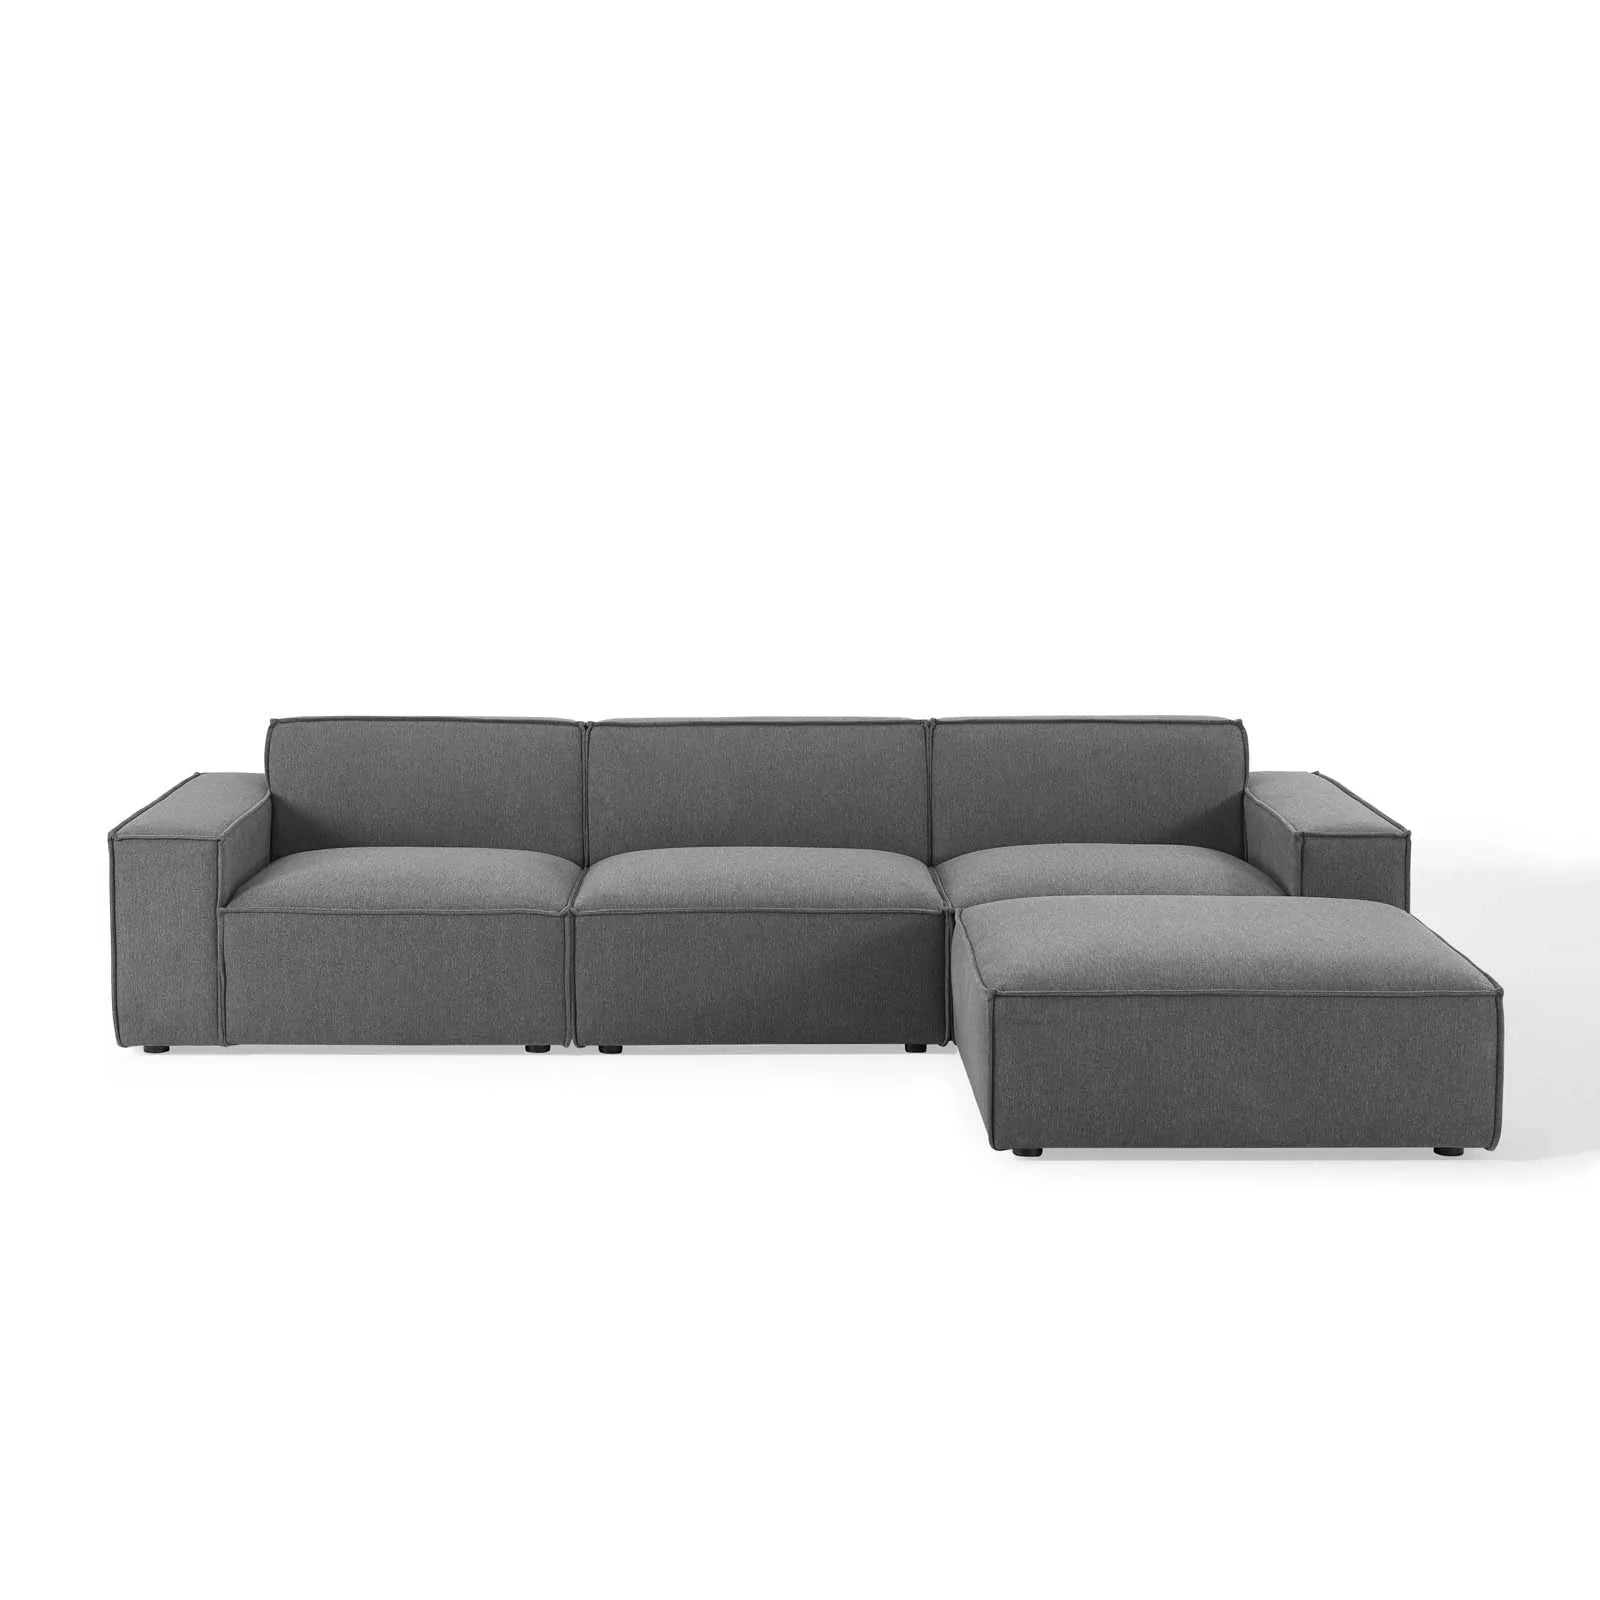 Breeze 4 Piece Sectional - Charcoal